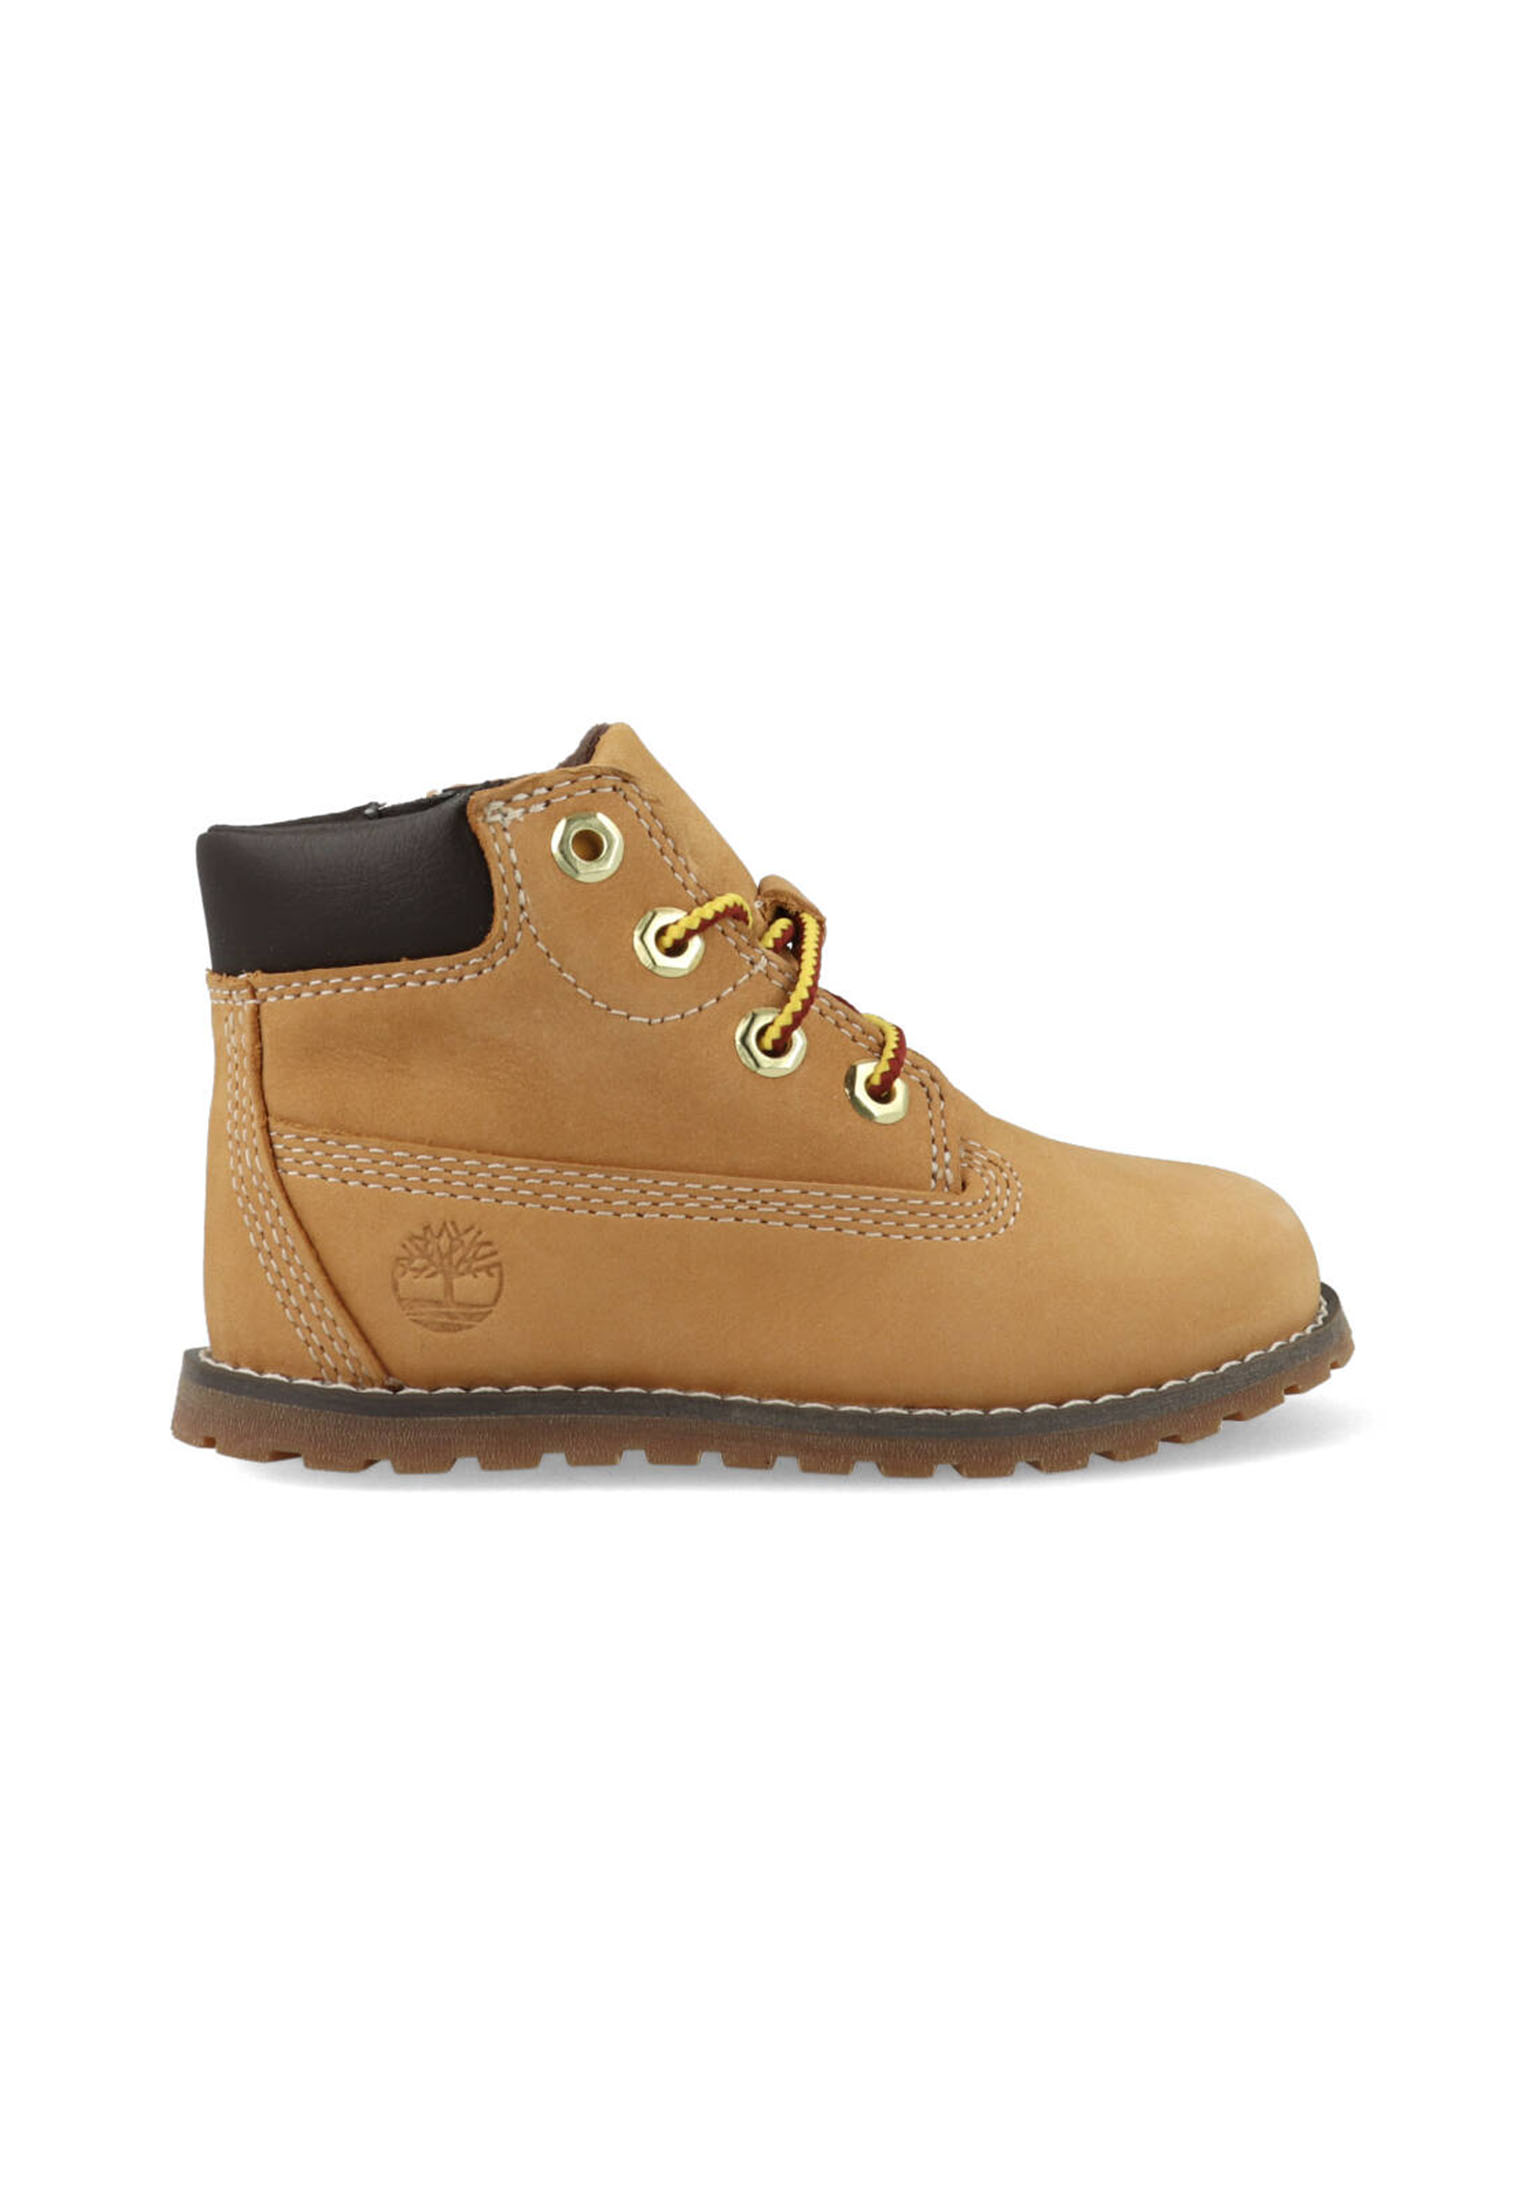 Timberland Pokey Pine 6-inch Boots A125Q Bruin-28 maat 28